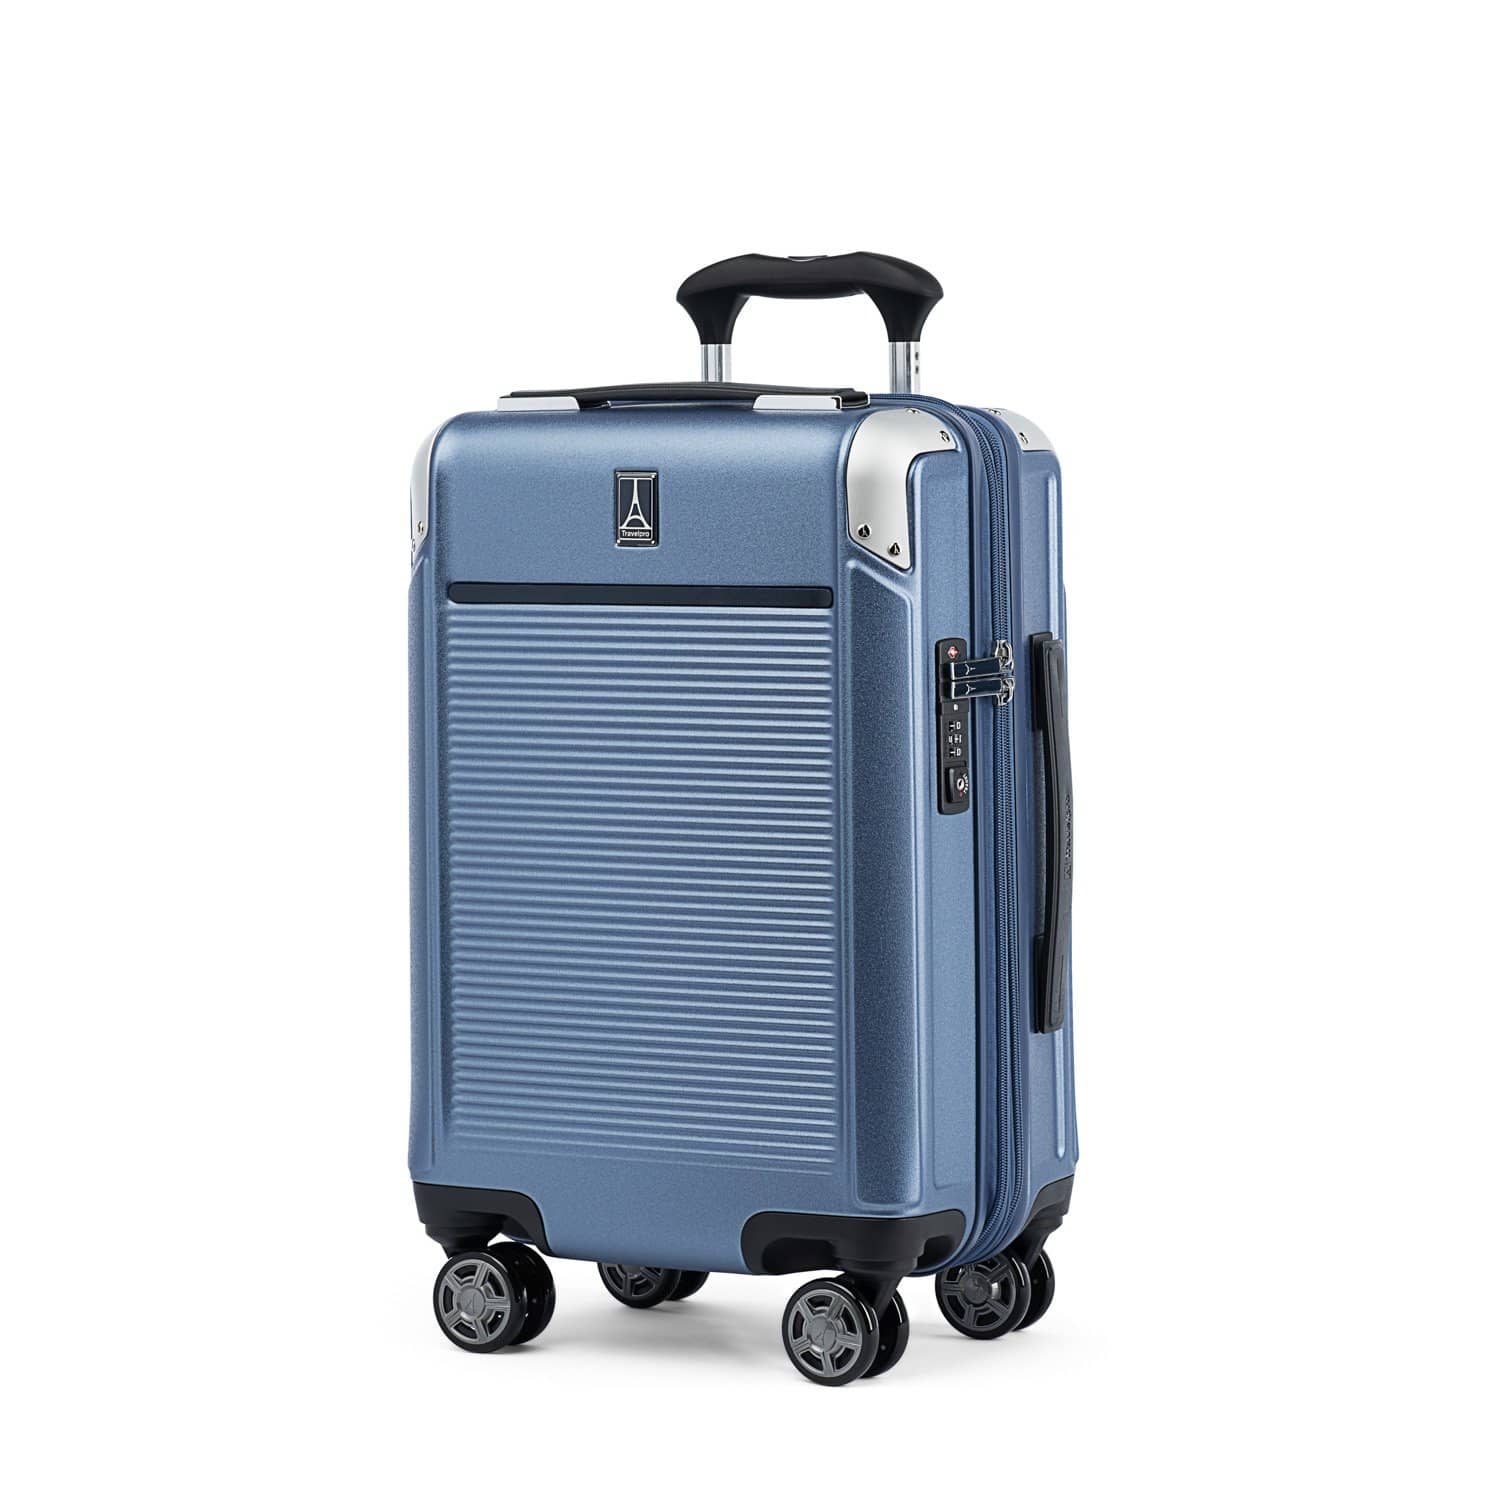 Platinum� Elite Compact Carry-On Expandable Hardside Spinner